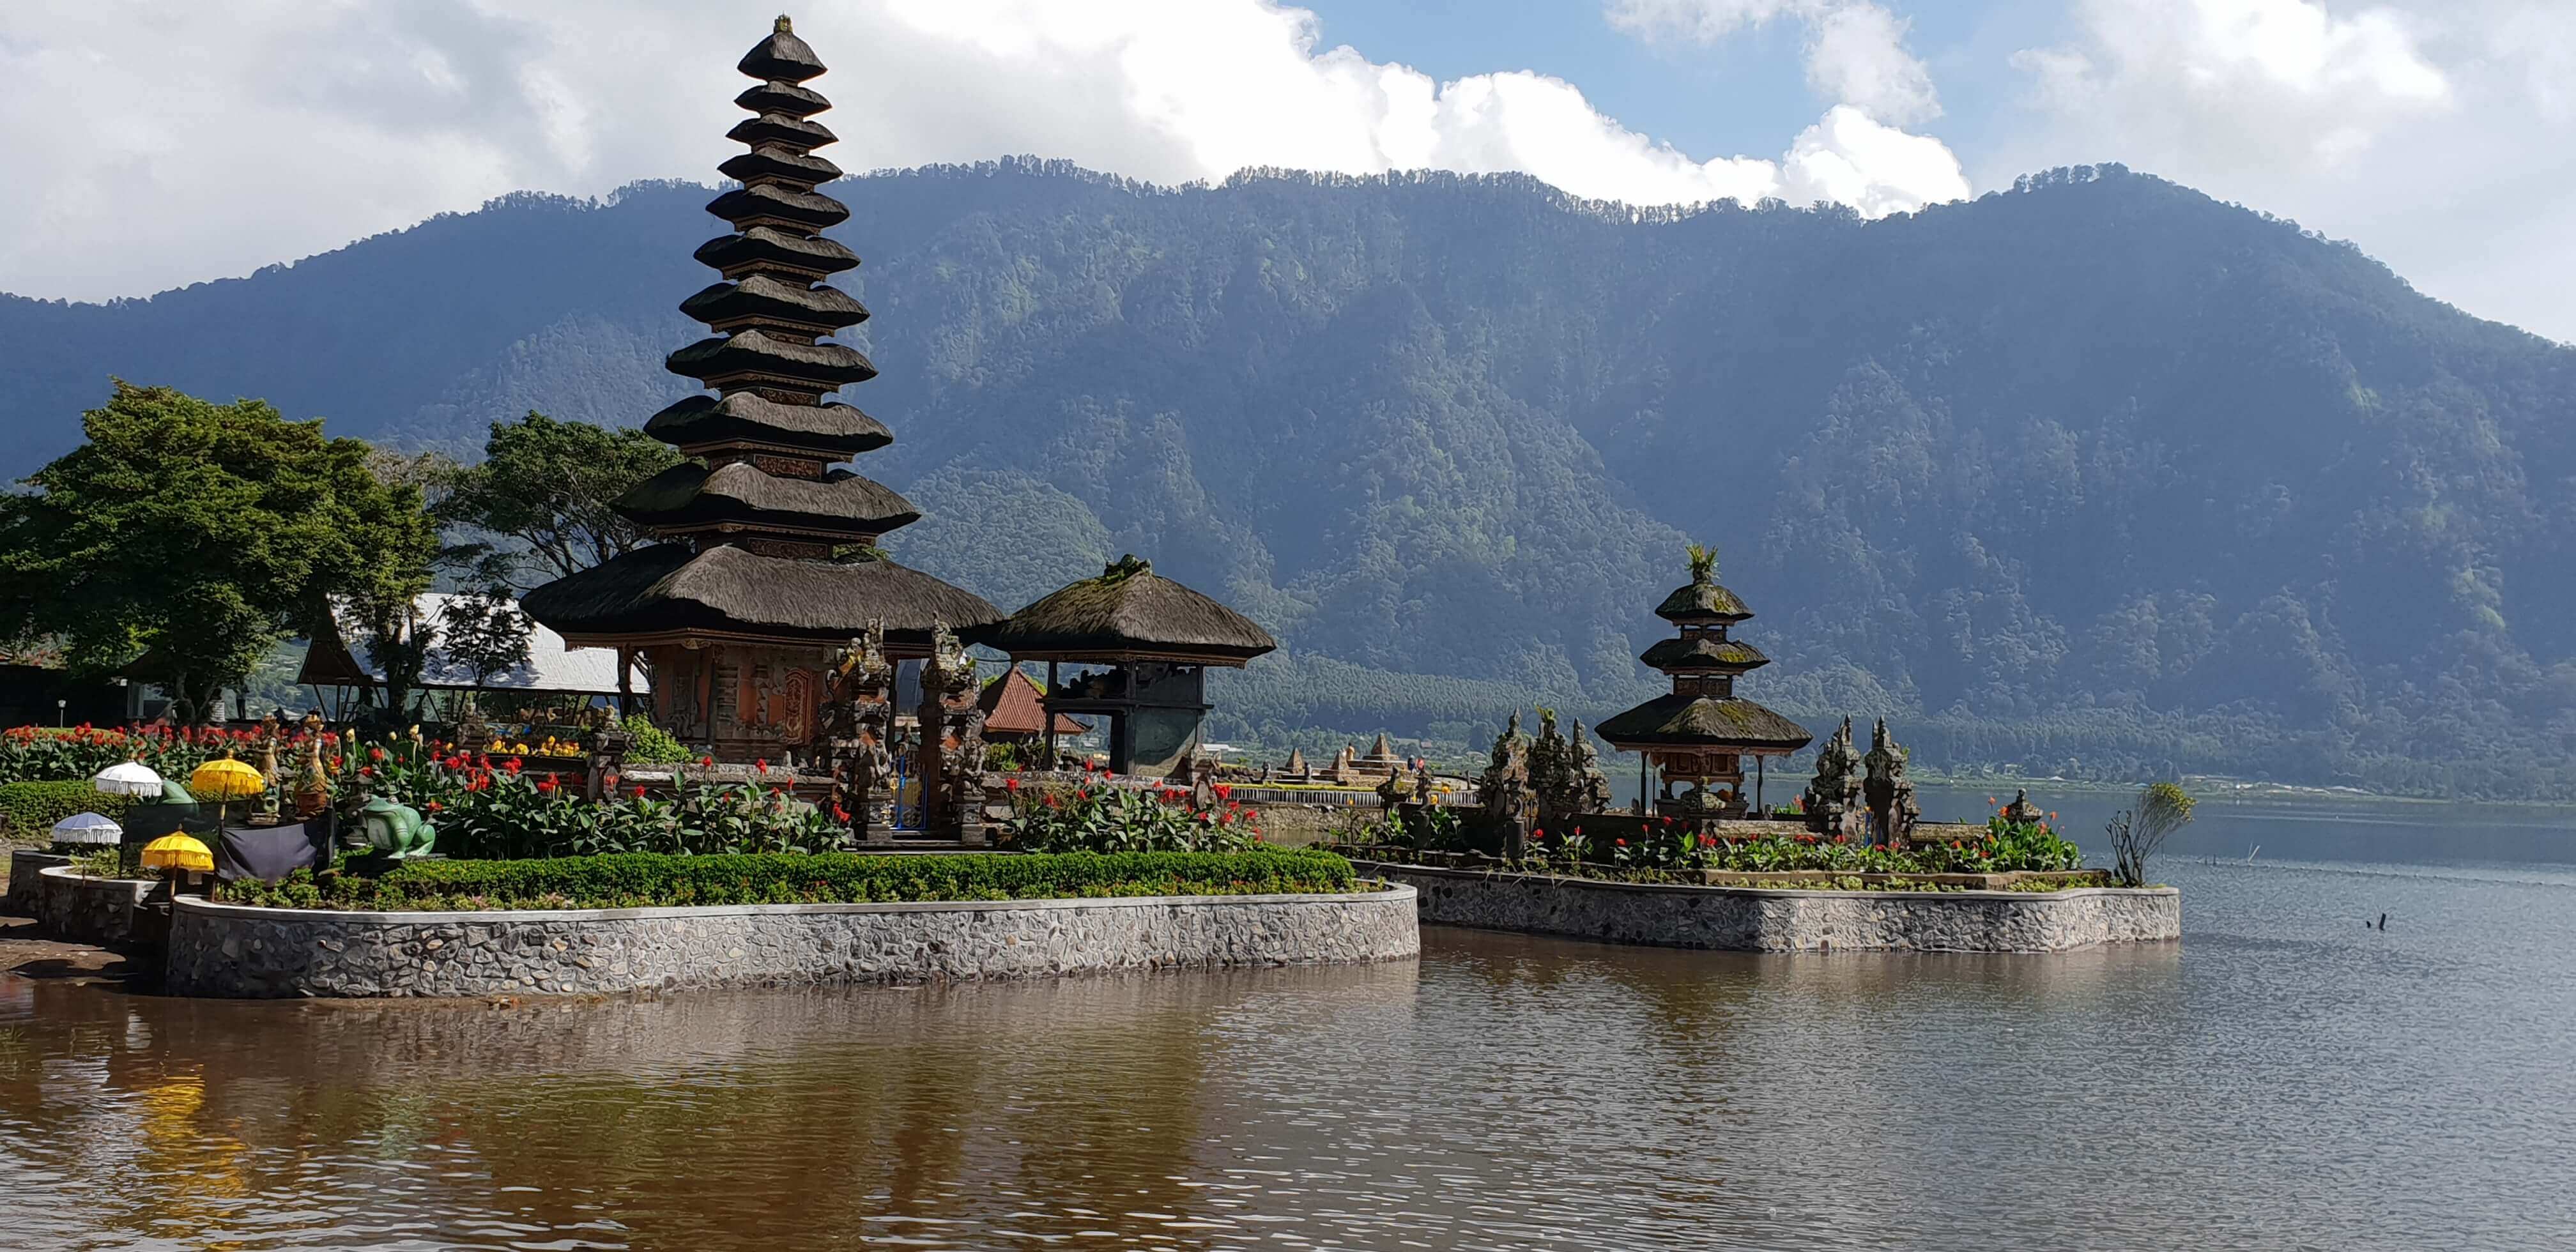 Ulun Danu Beratan temple is a lovely place located on the outskirts of Ubud and a must-do in your 10 day Bali itinerary